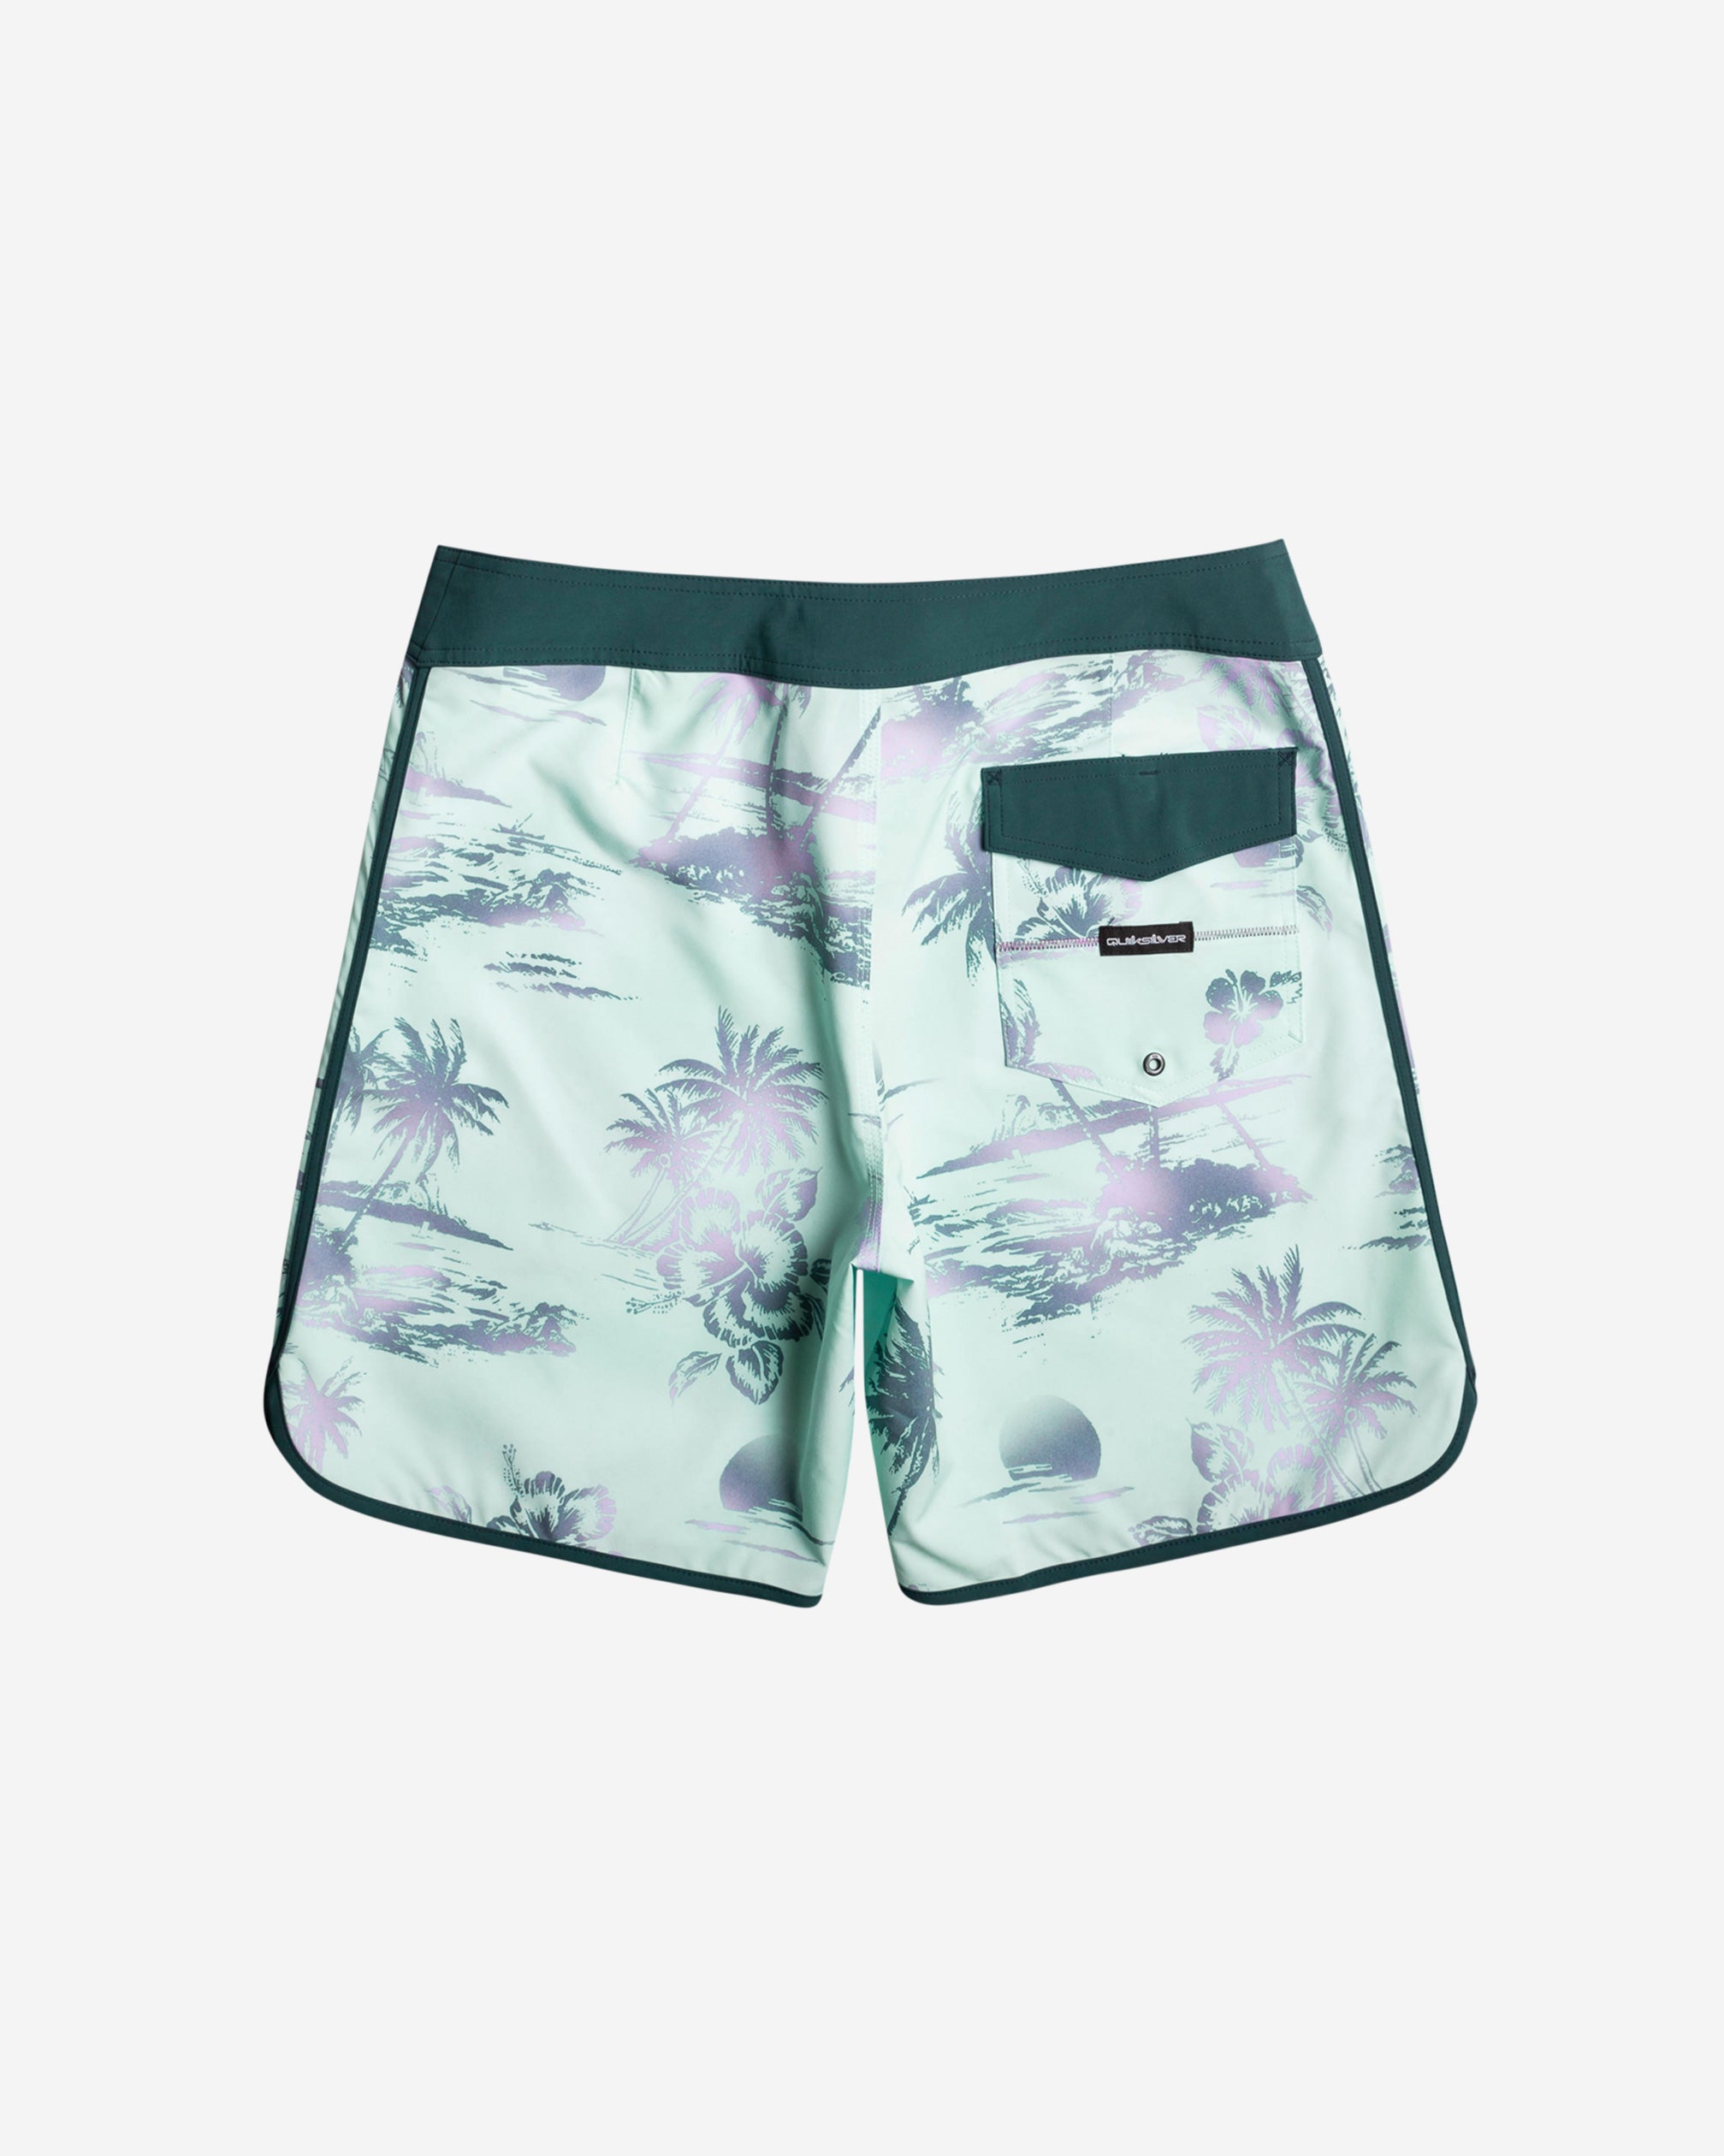 The scallop hem says vintage cool. But this modern print is a nod to the future. Together they create one of the coolest board shorts ever. The Surfsilk Scallop has plenty of performance features too, including a recycled fabric made from ocean waste with 4-way stretch.